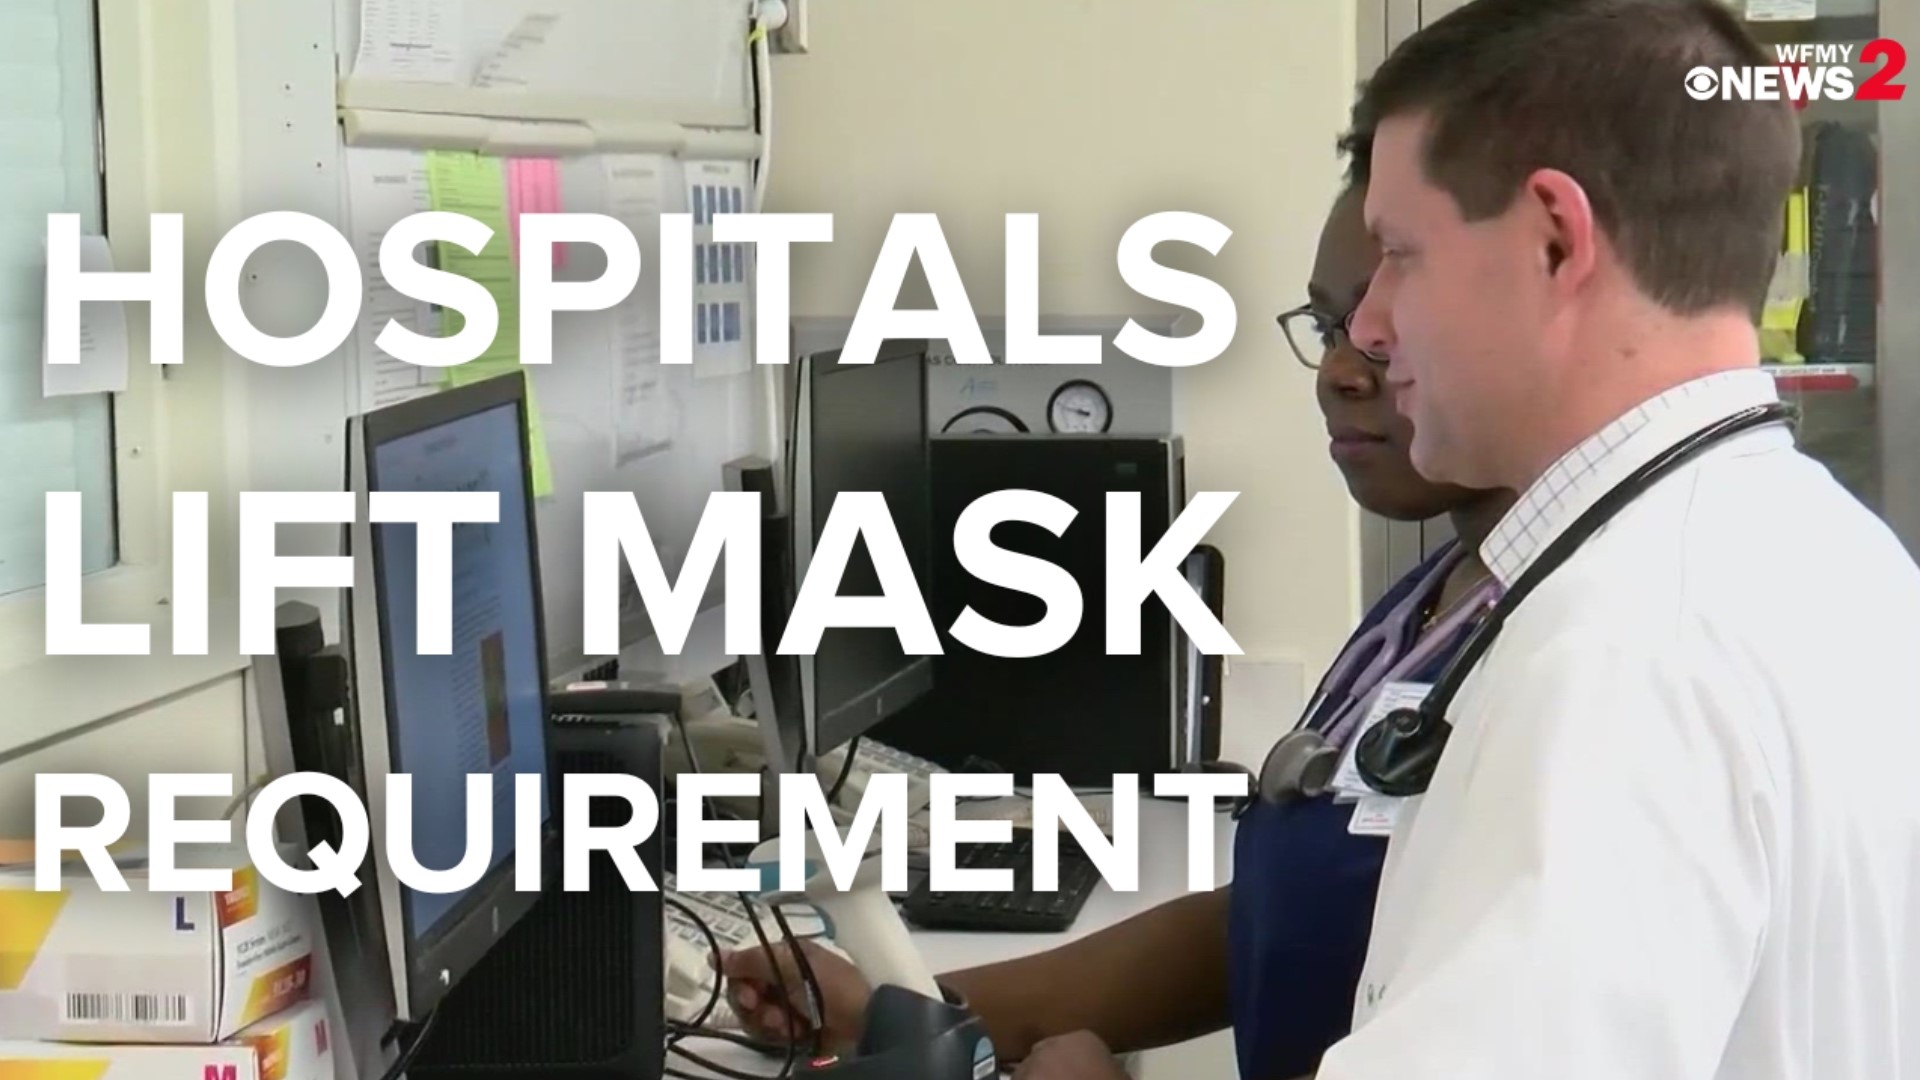 Cone Health, Novant Health, and Atrium Health Wake Forest Baptist said masking may still be required at hospitals in certain situations.